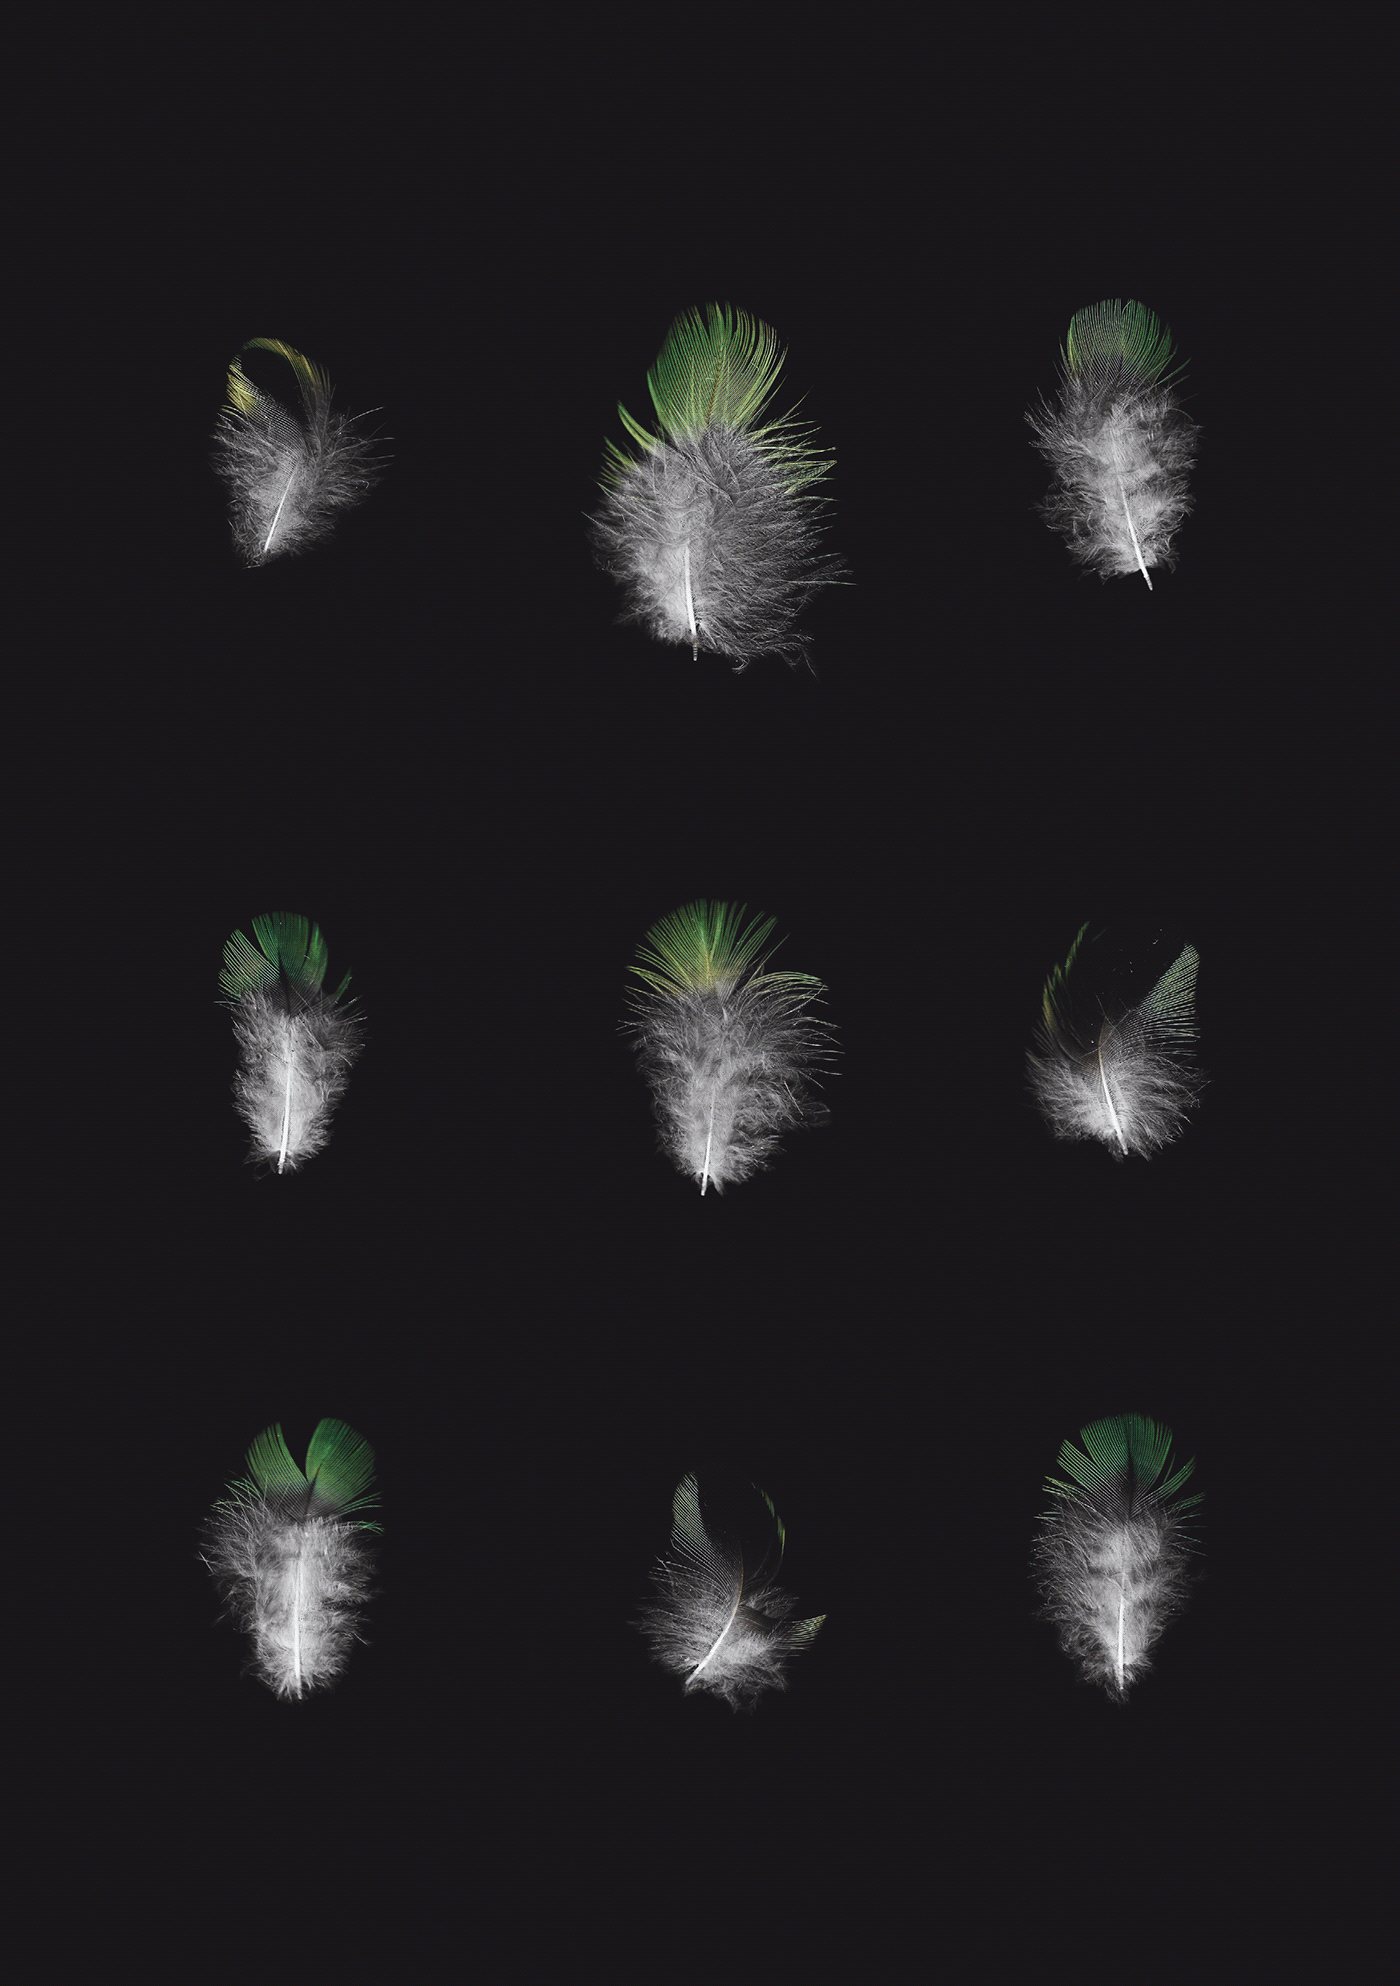 chaos Flowers Nature objects Order scanogram scanograms scanography